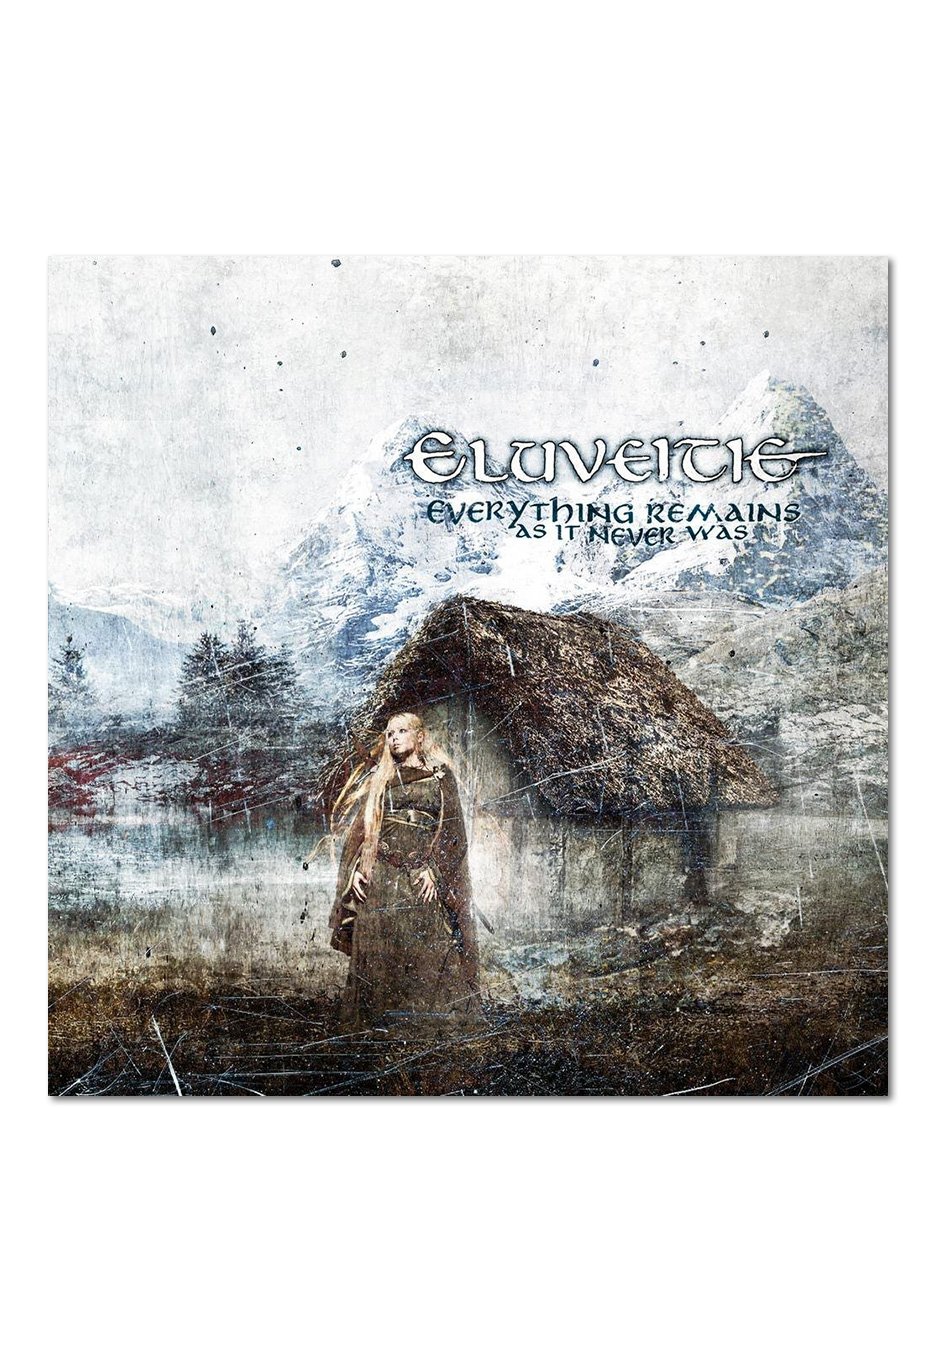 Eluveitie - Everything Remains (As It Never Was) - CD